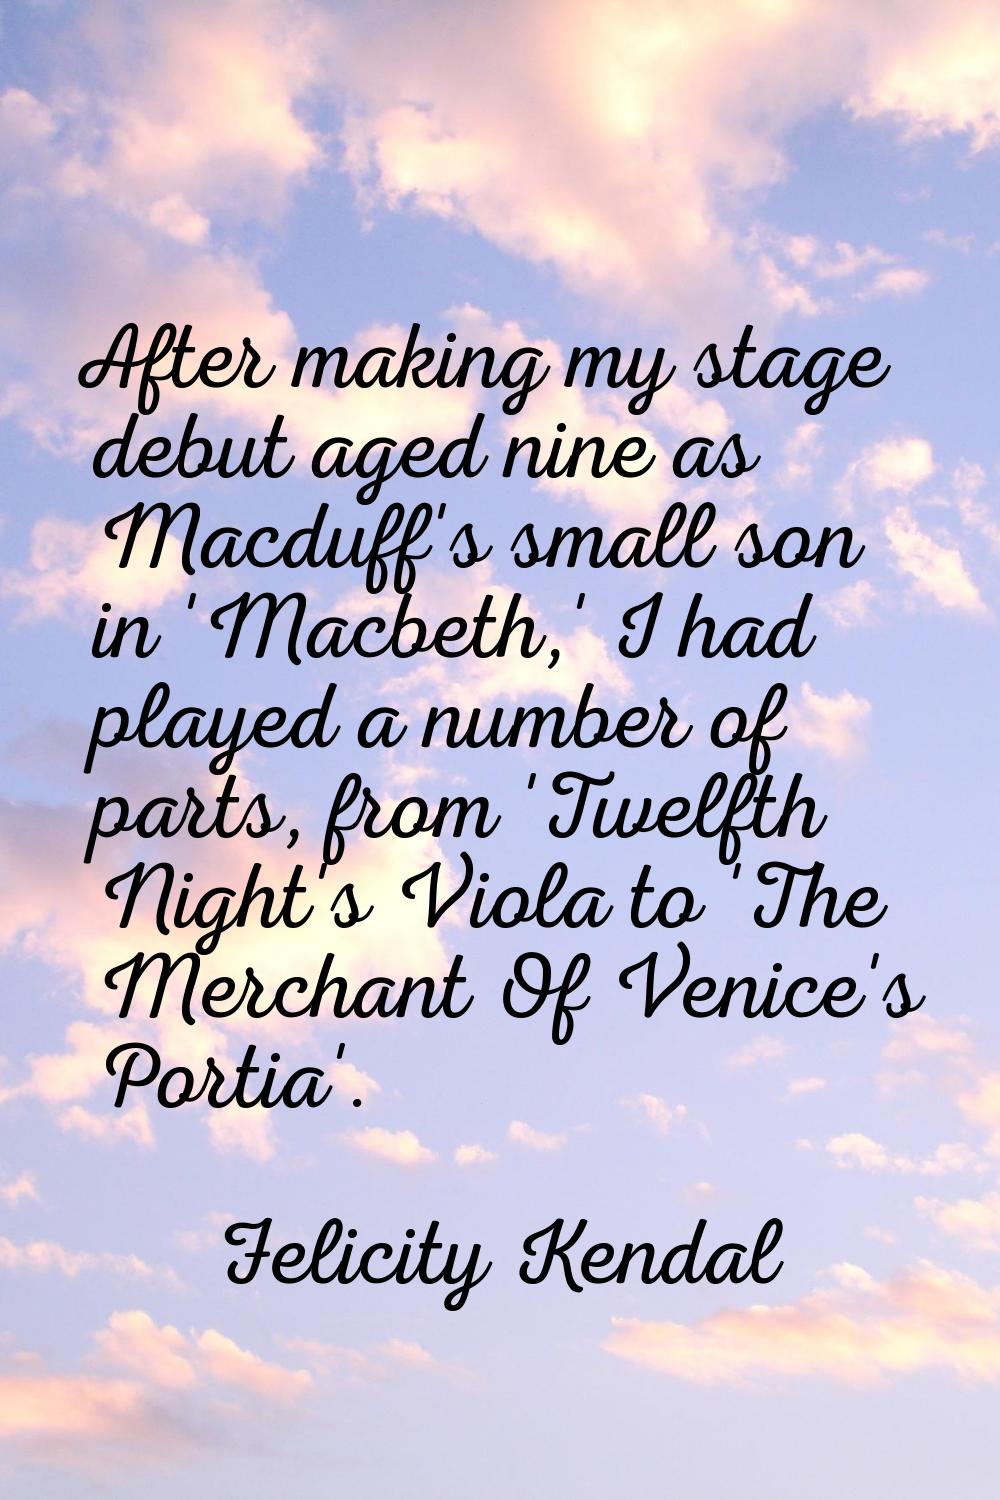 After making my stage debut aged nine as Macduff's small son in 'Macbeth,' I had played a number of